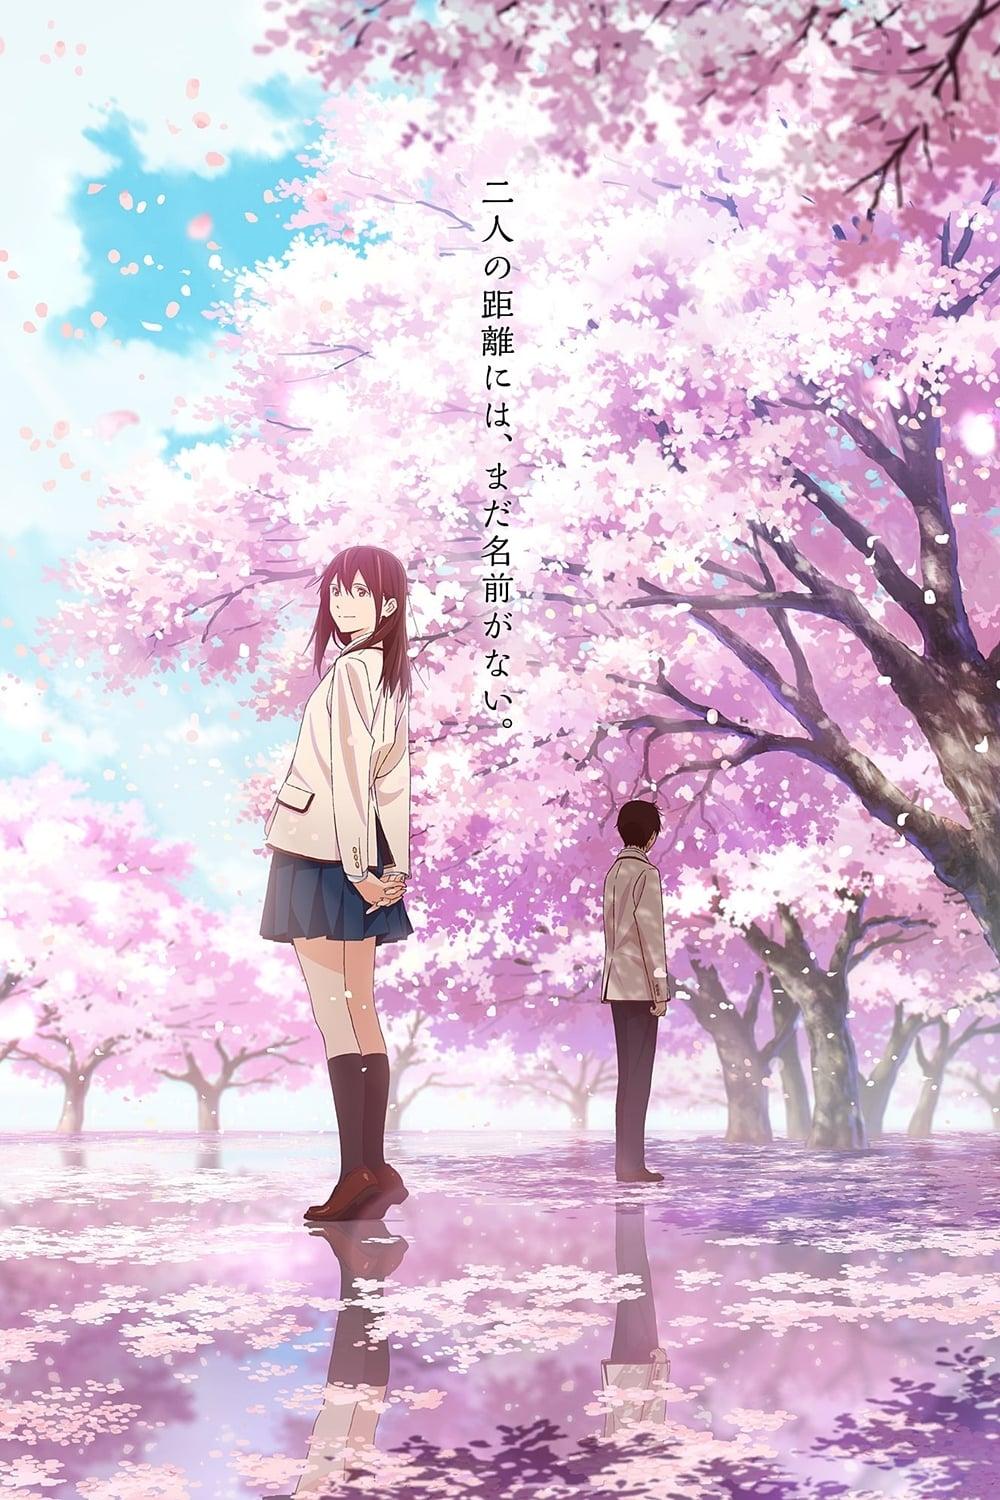 I Want to Eat Your Pancreas poster